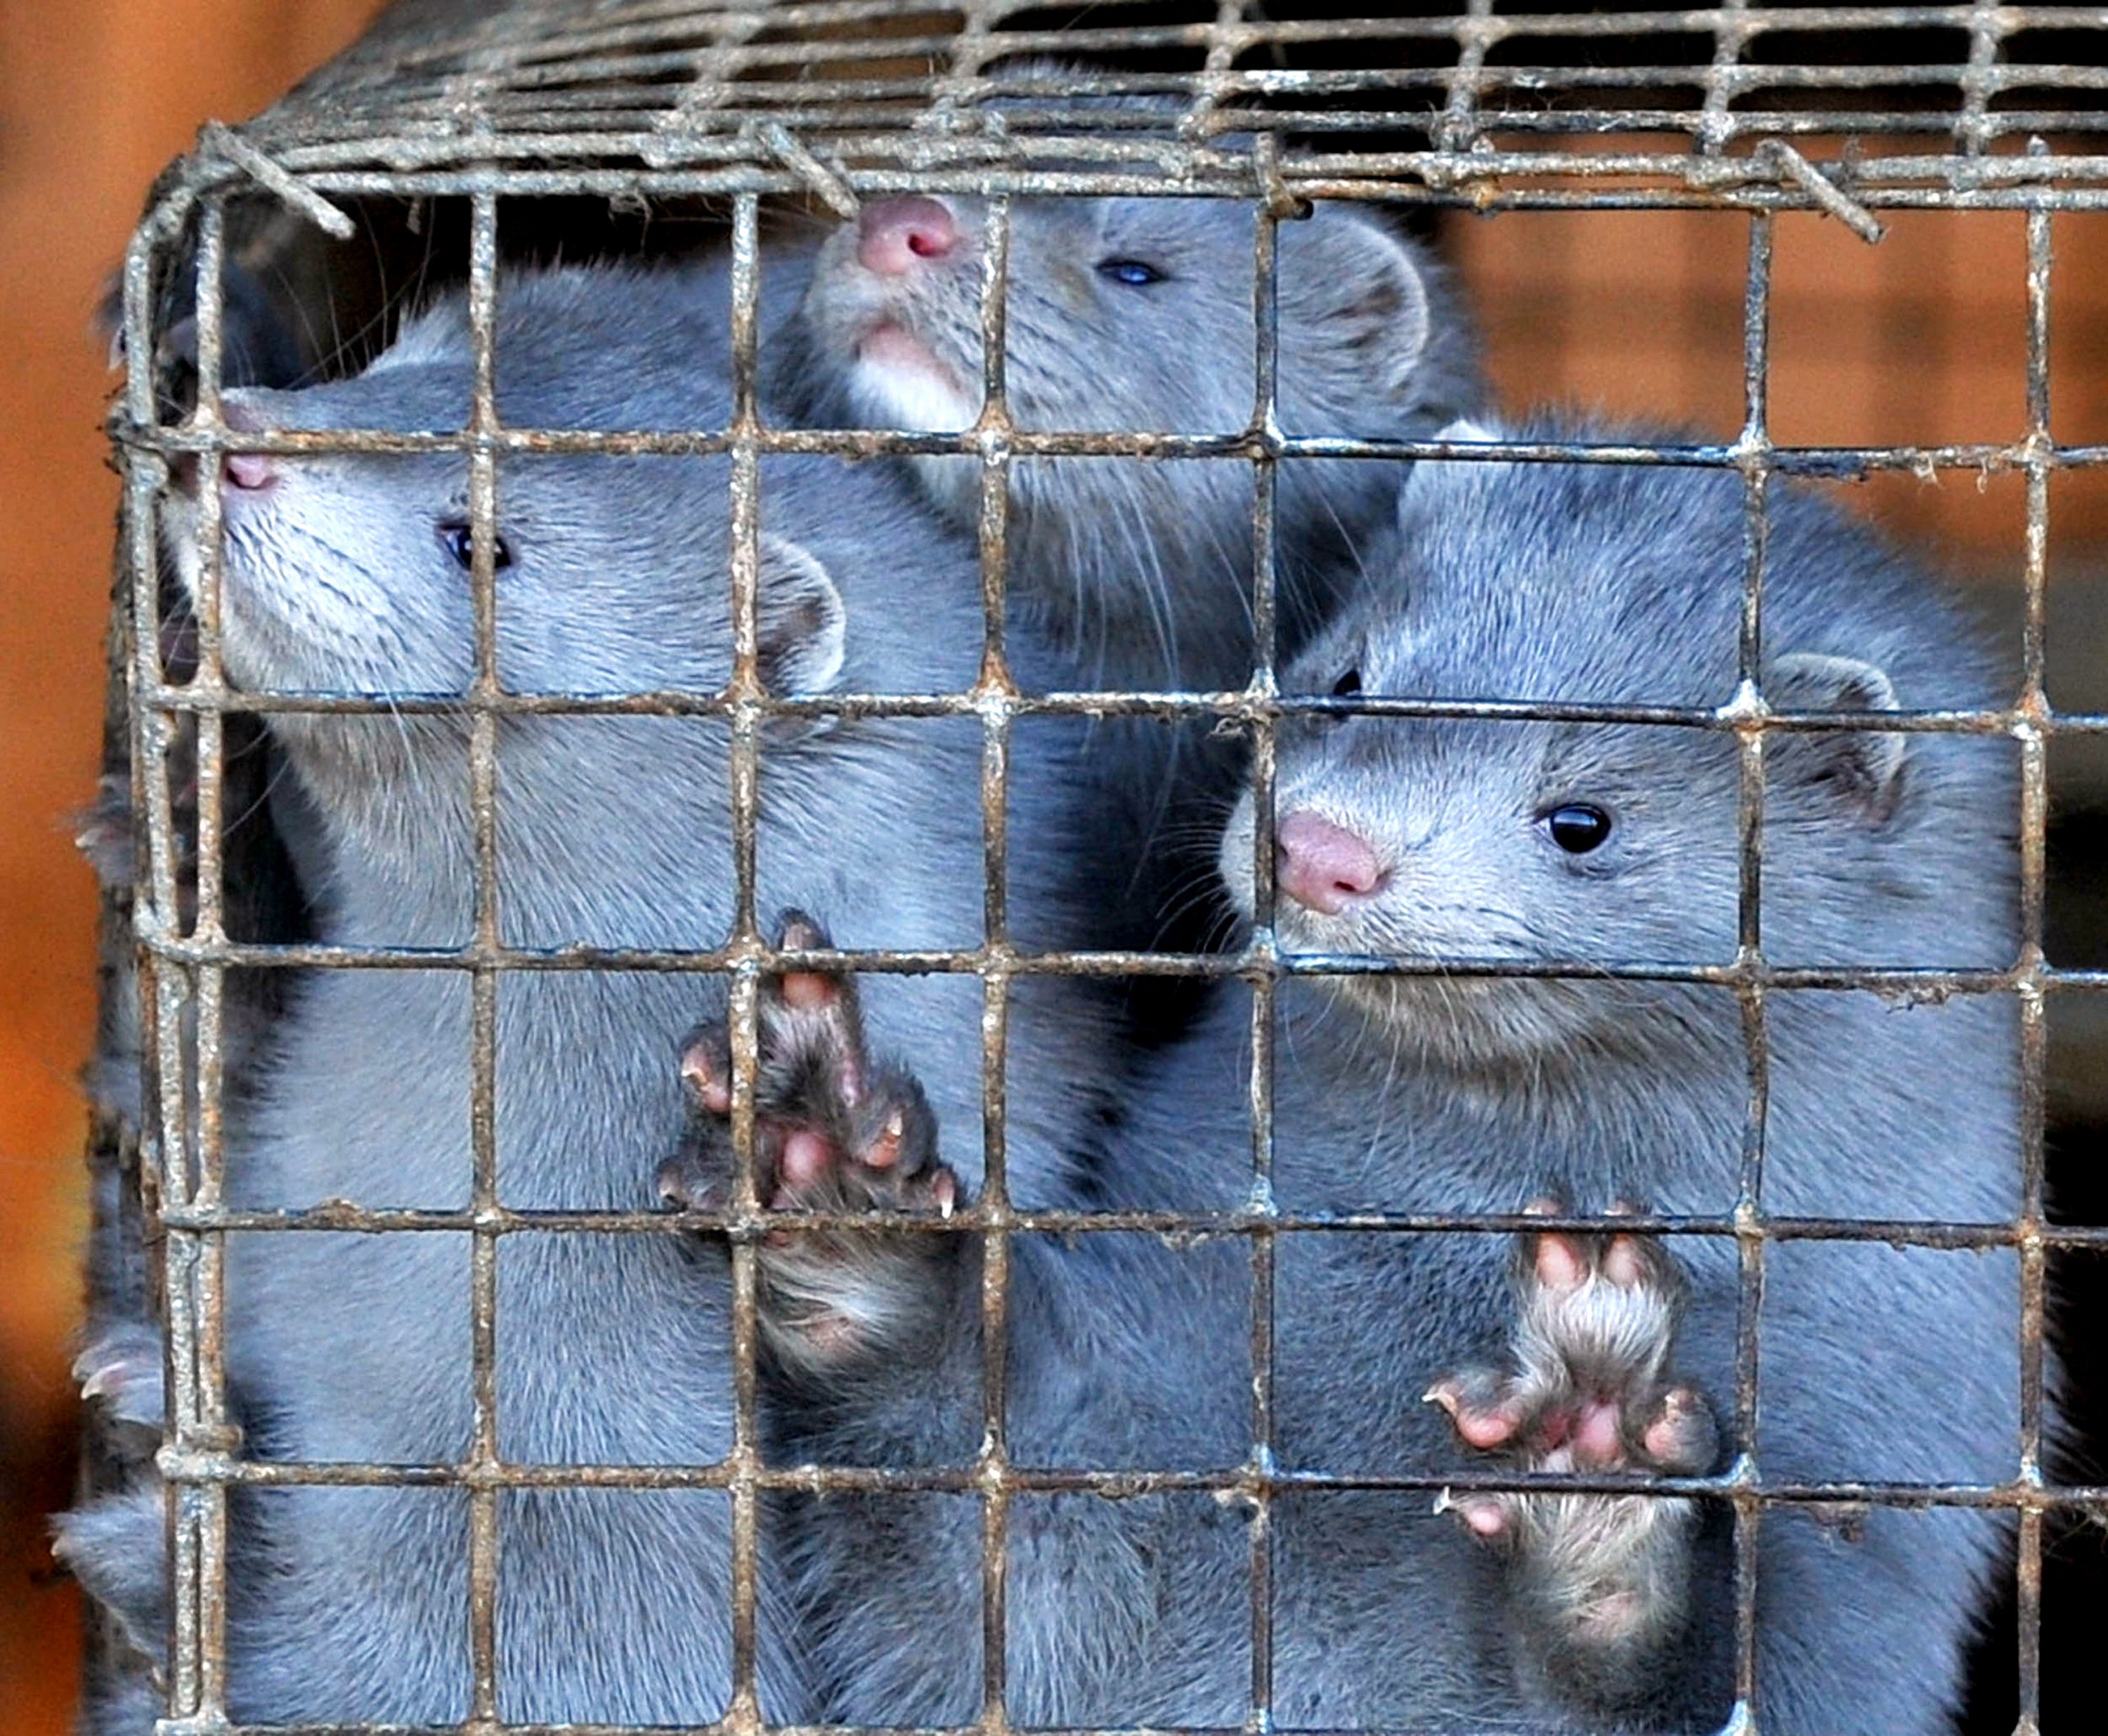 Minks peer out of their cages